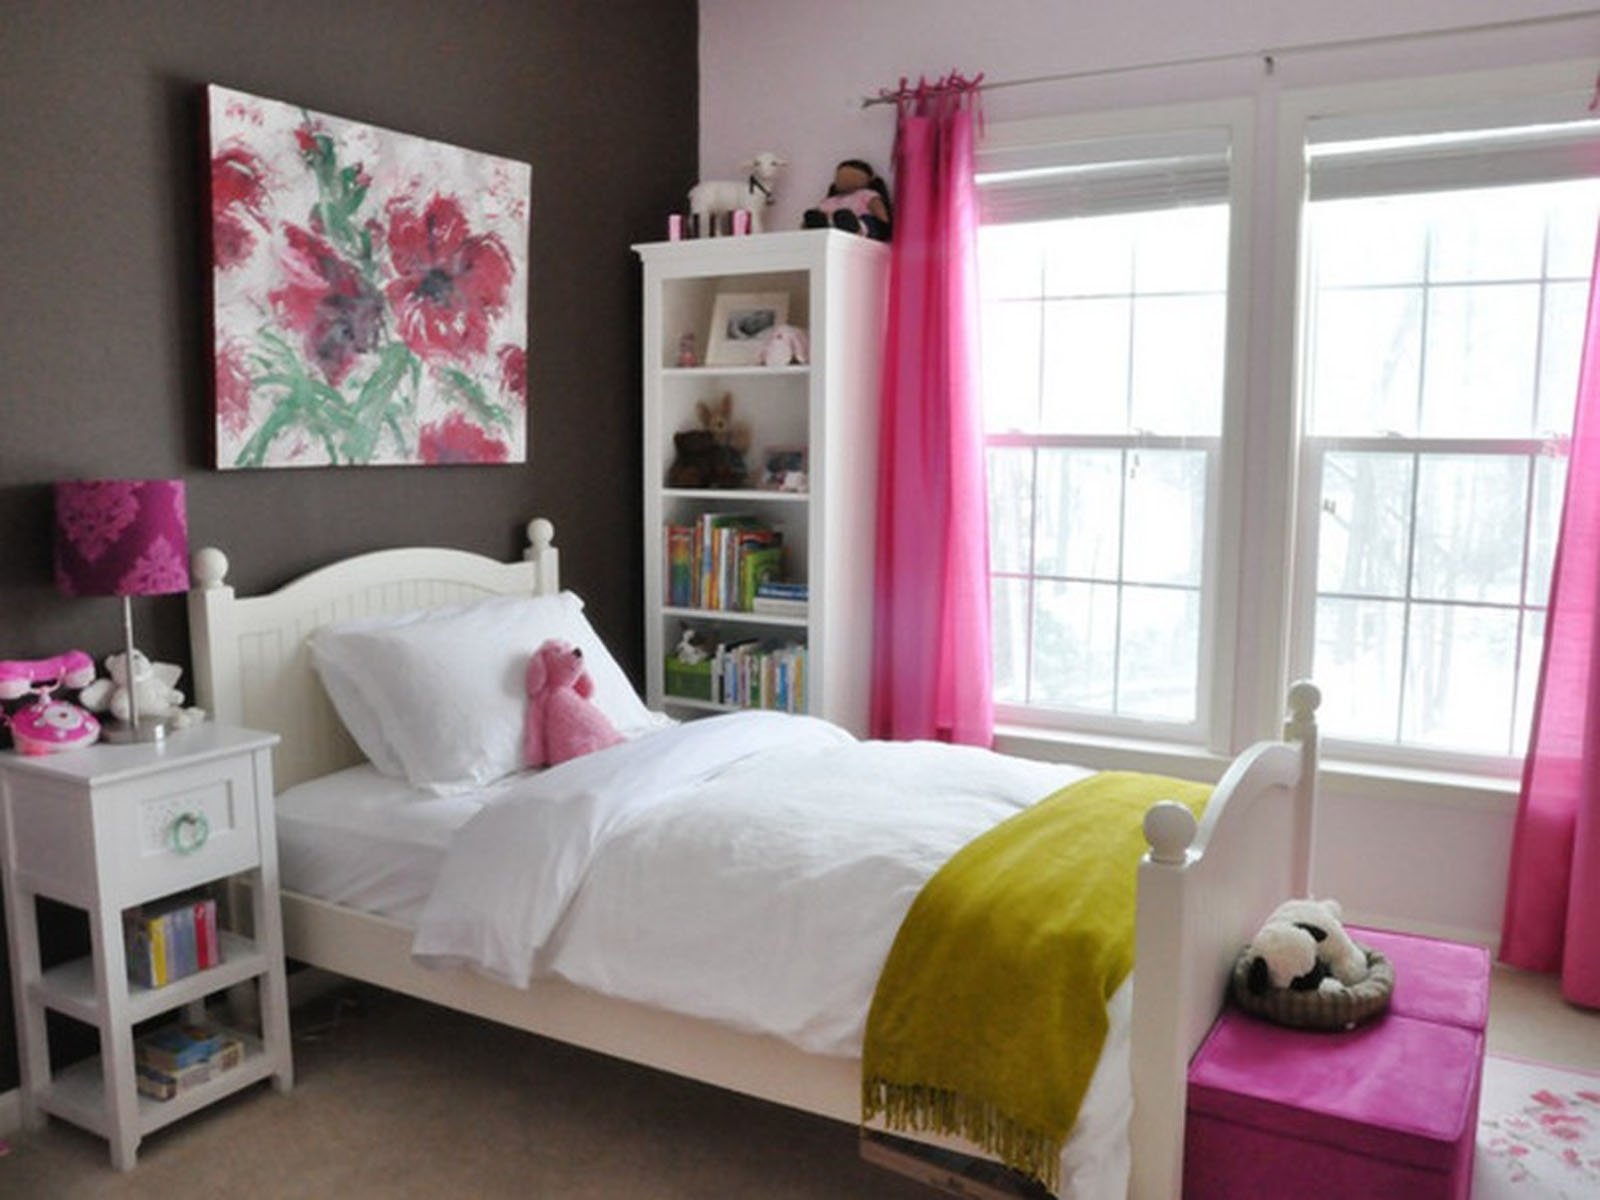 10 Most Recommended Small Bedroom Ideas For Teenage Girls designs for teenage girl bedrooms small bedroom ideas for teenage 2023